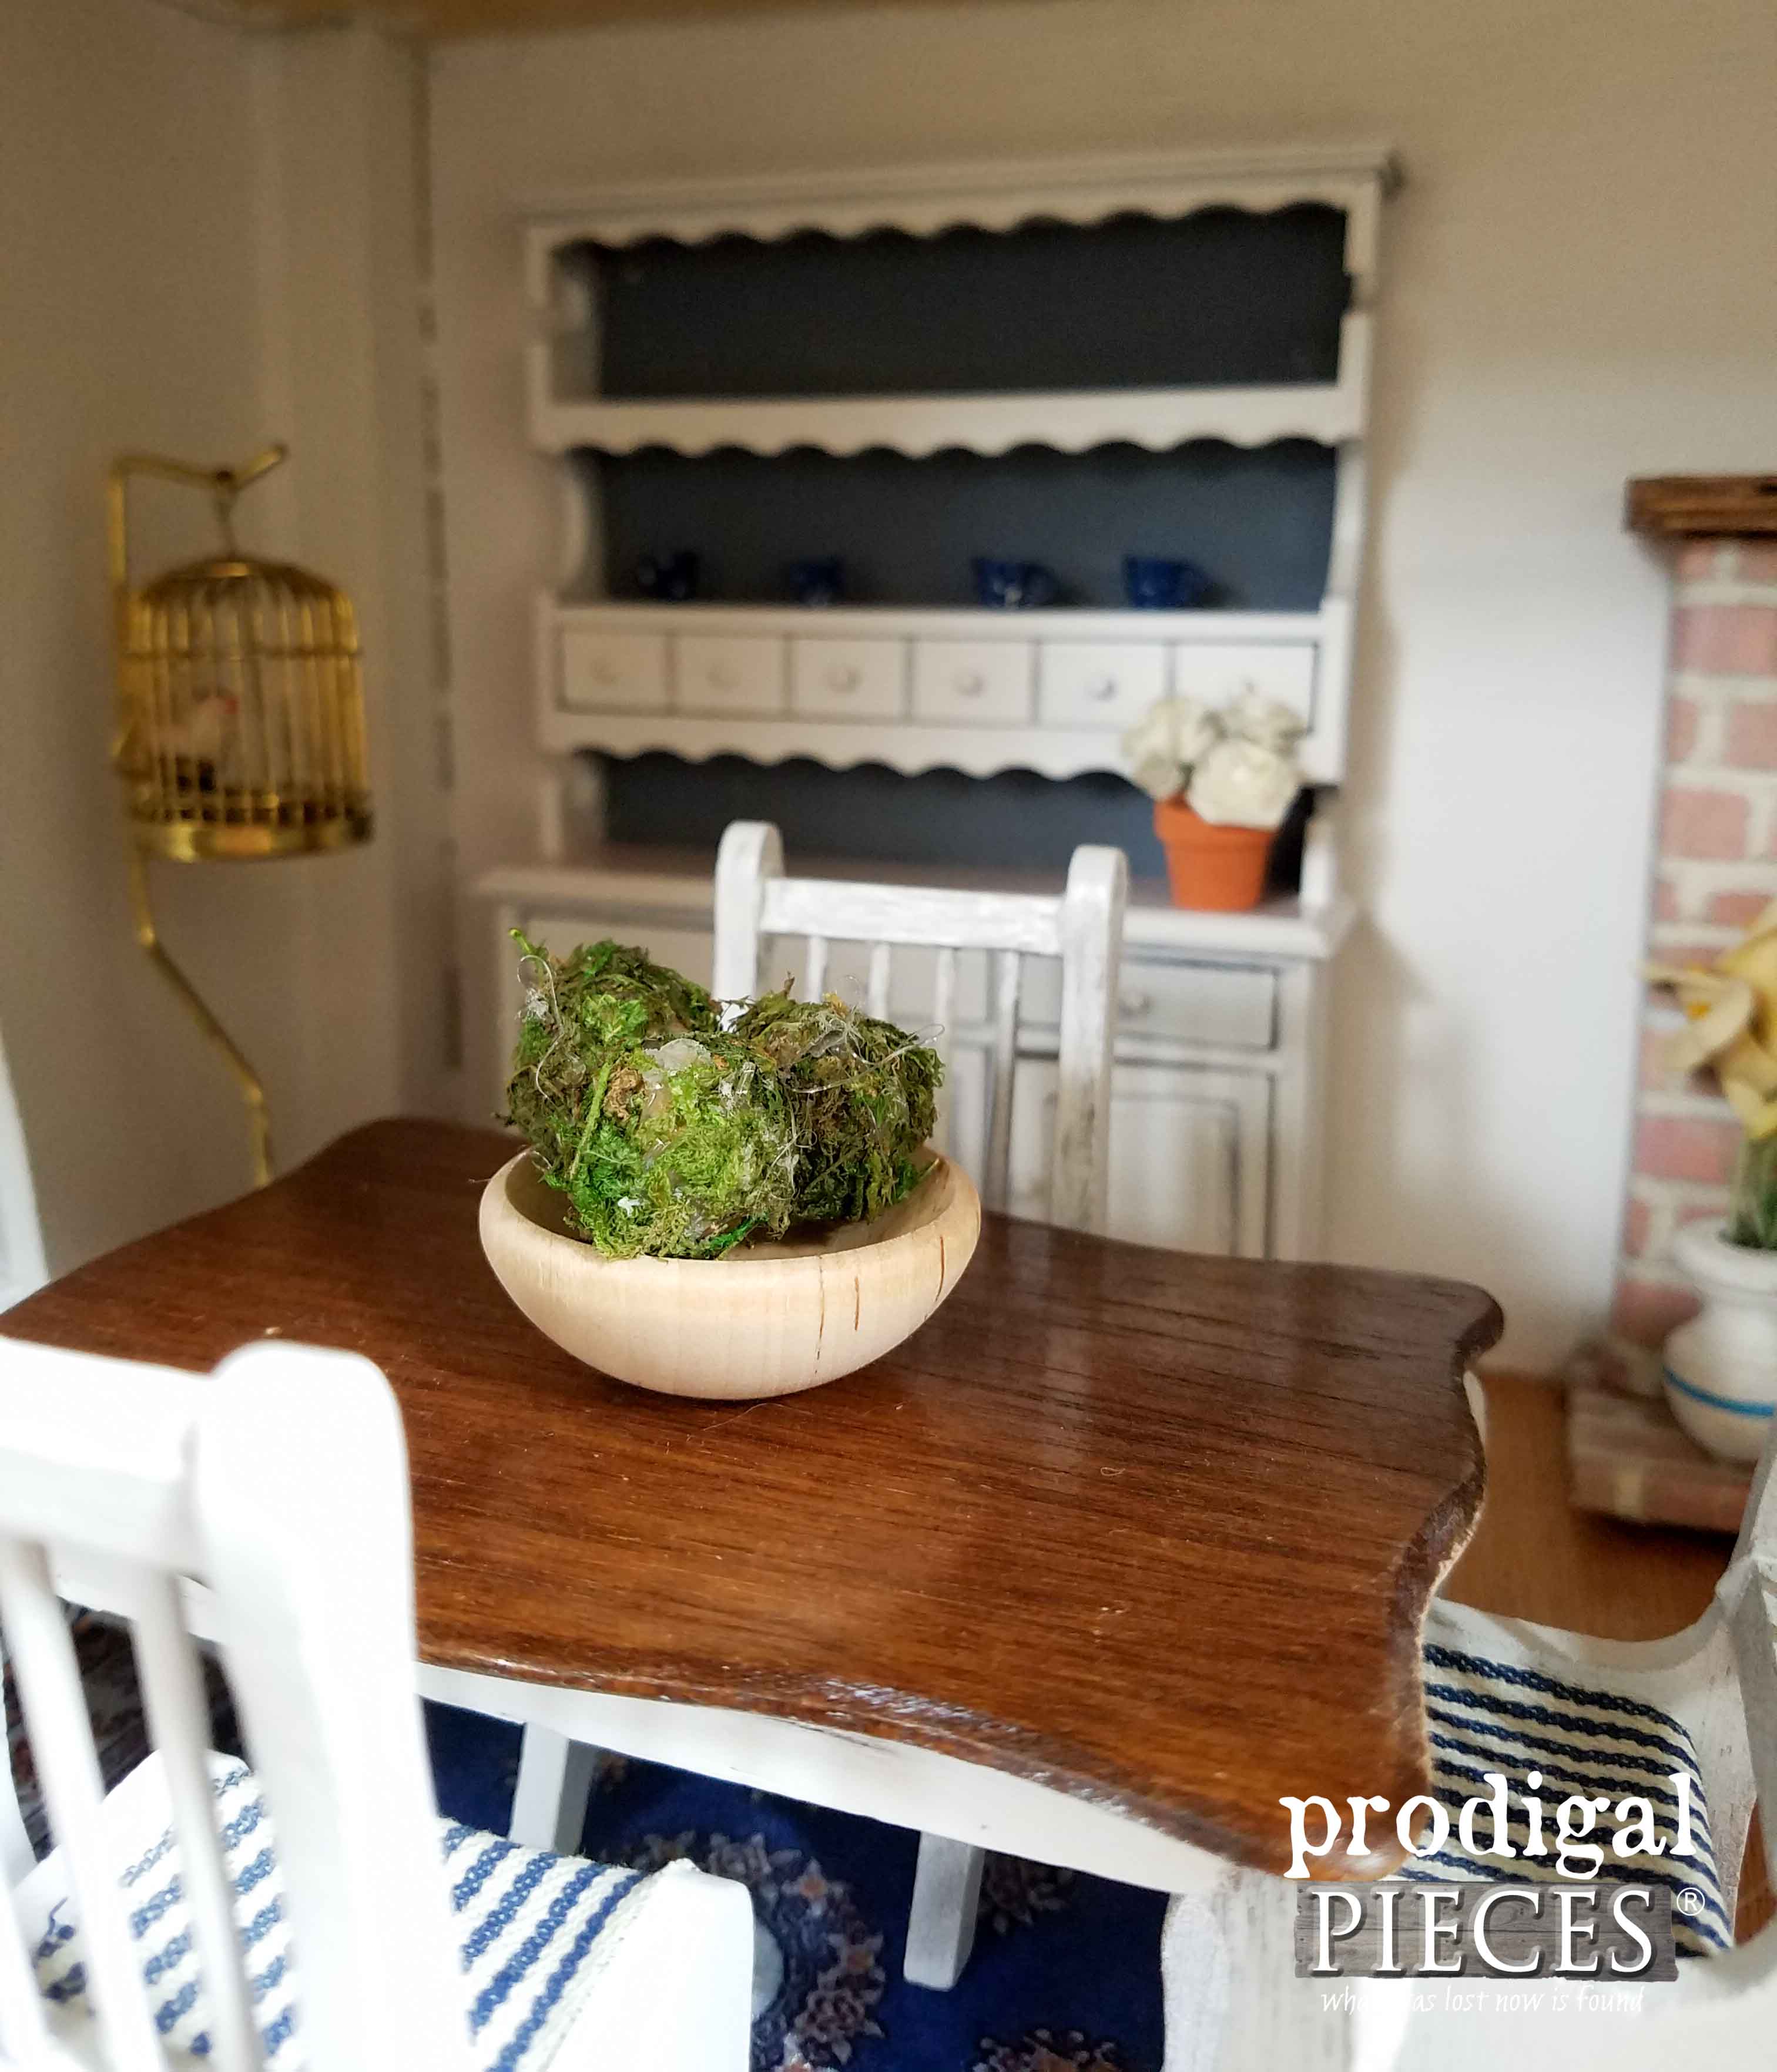 Farmhouse Table in Repurposed Radio Dollhouse by Prodigal Pieces | www.prodigalpieces.com